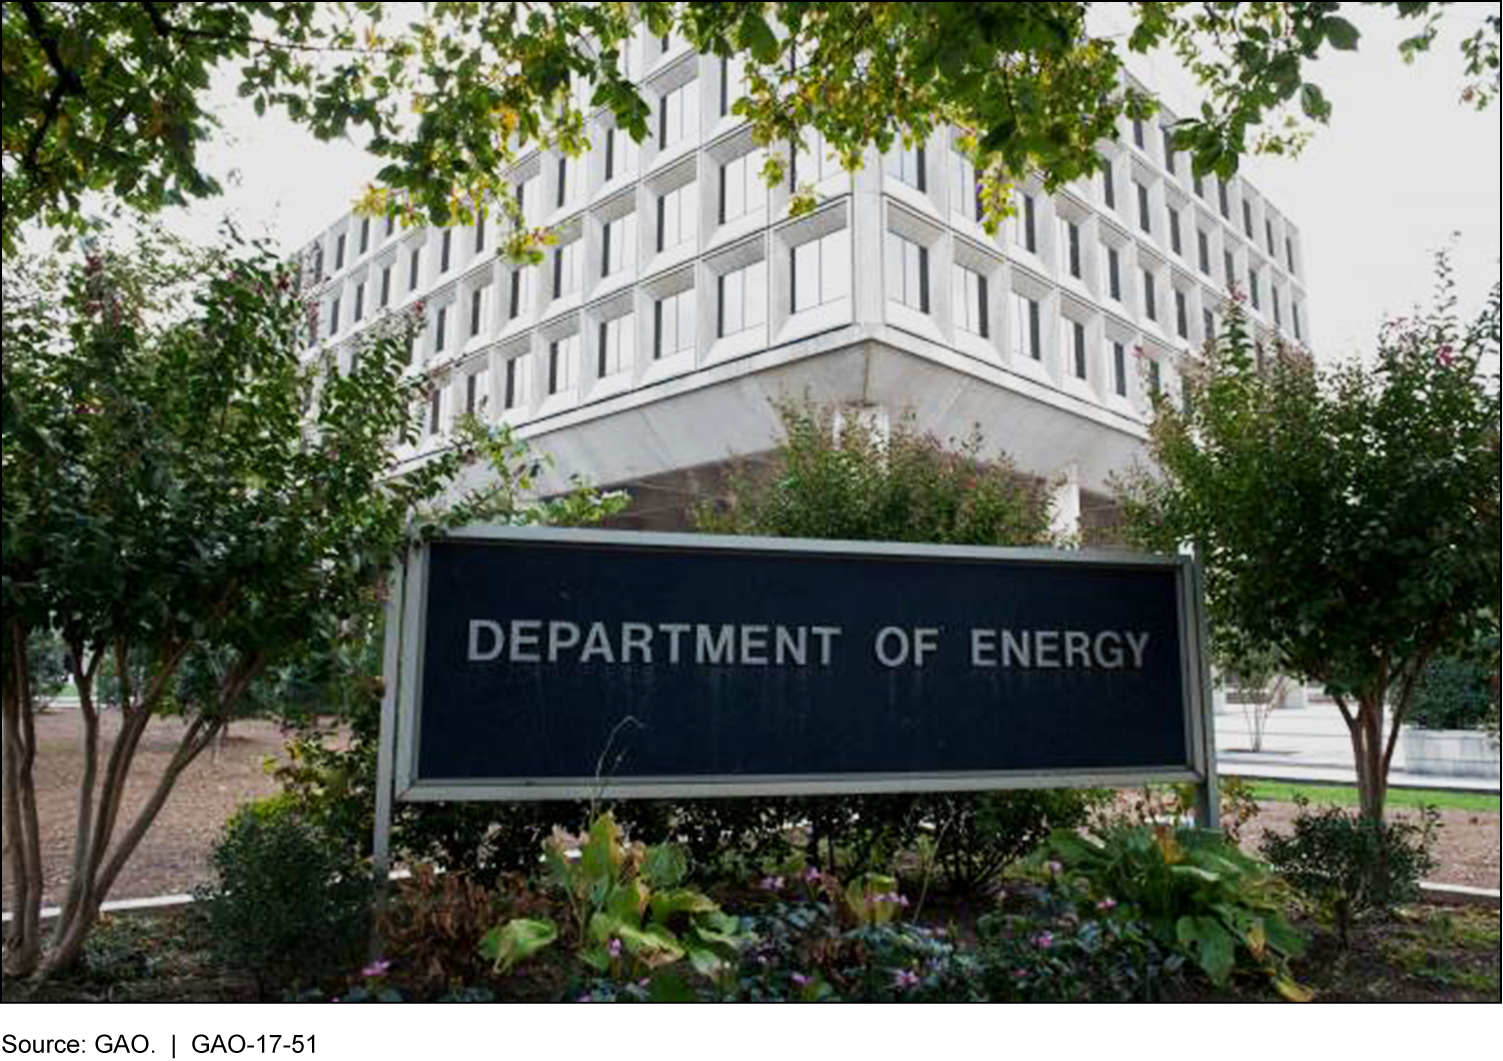 Picture of the Department of Energy building.